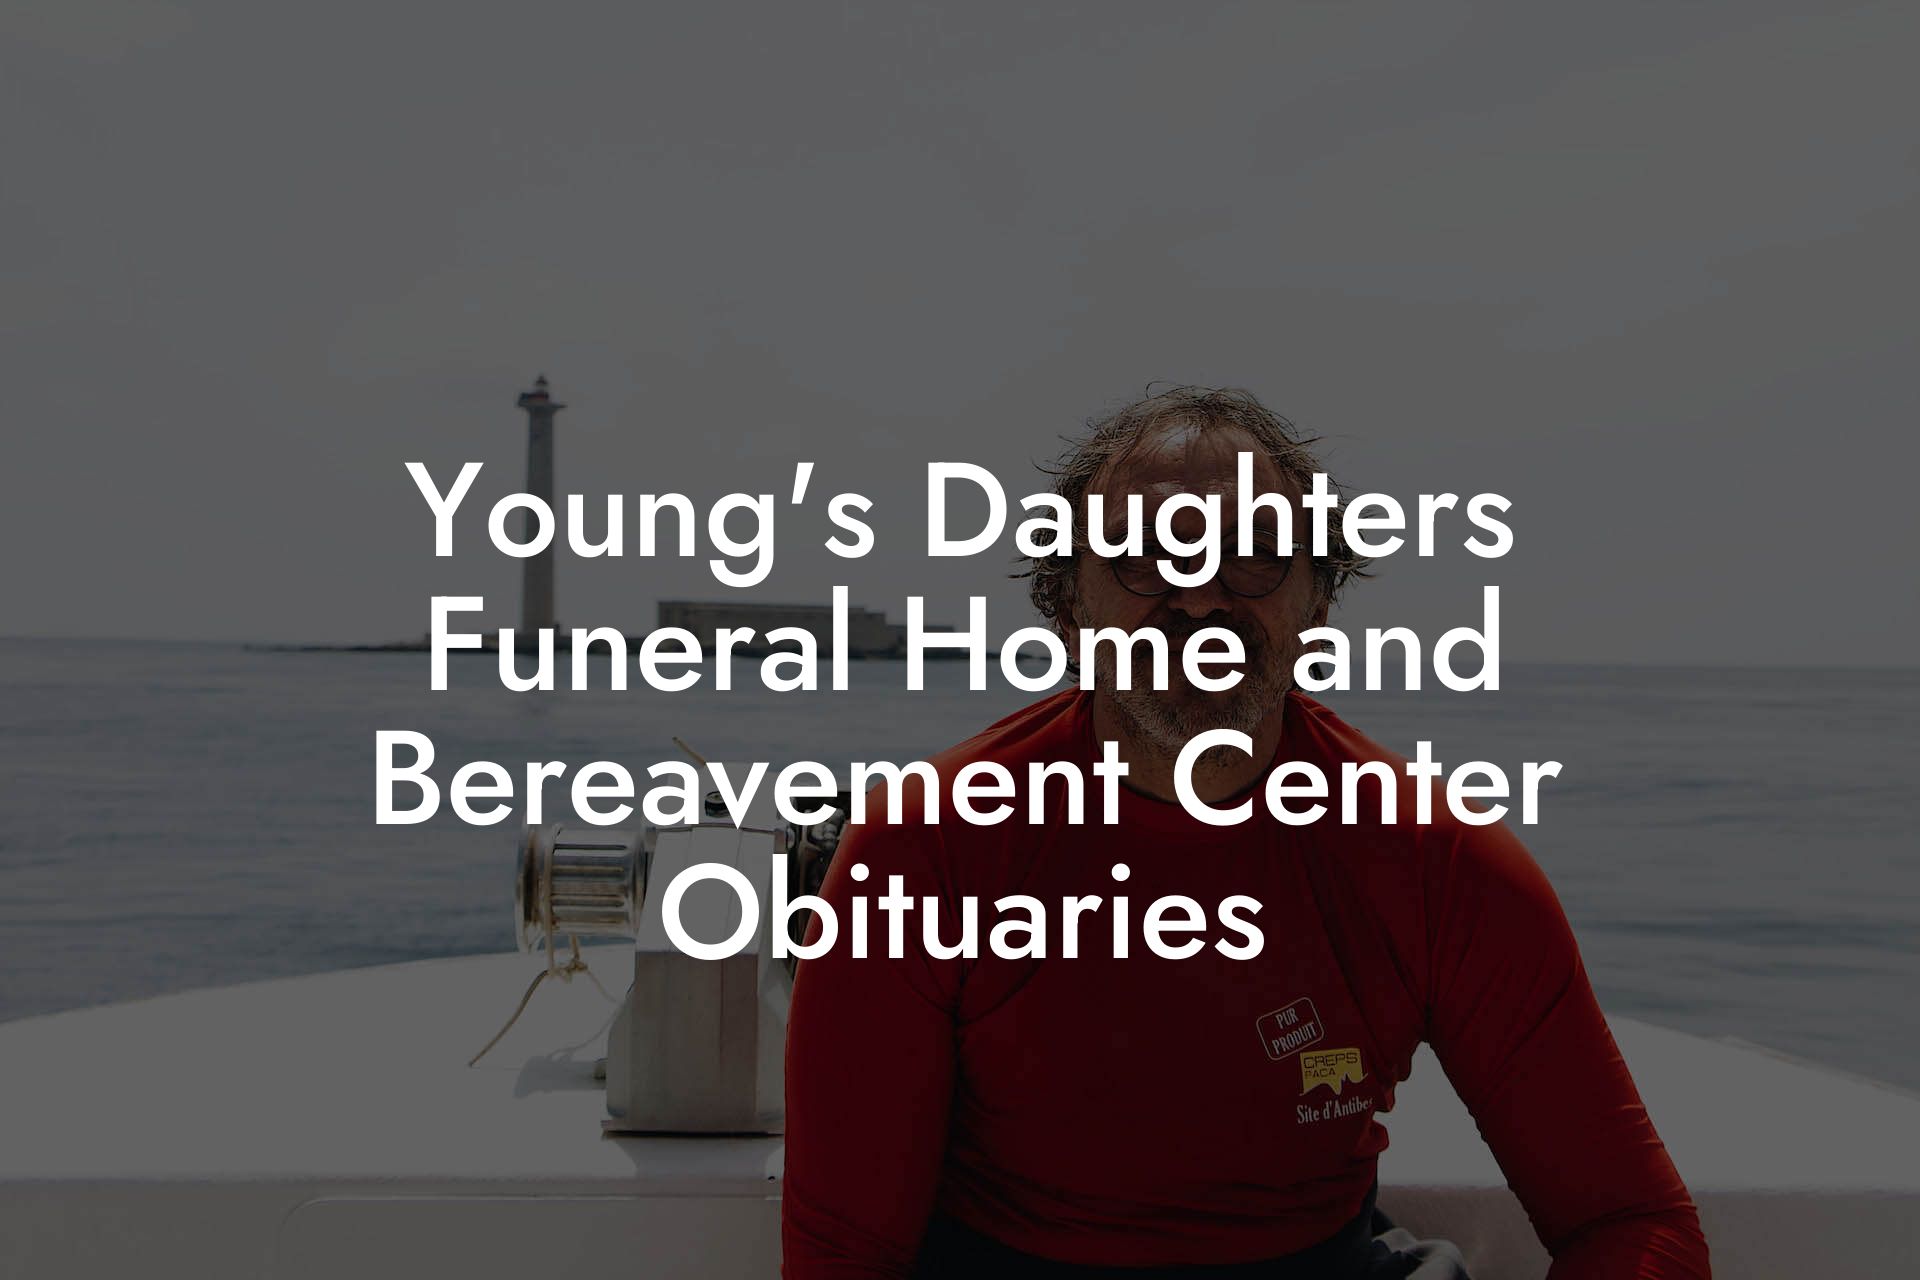 Young's Daughters Funeral Home and Bereavement Center Obituaries